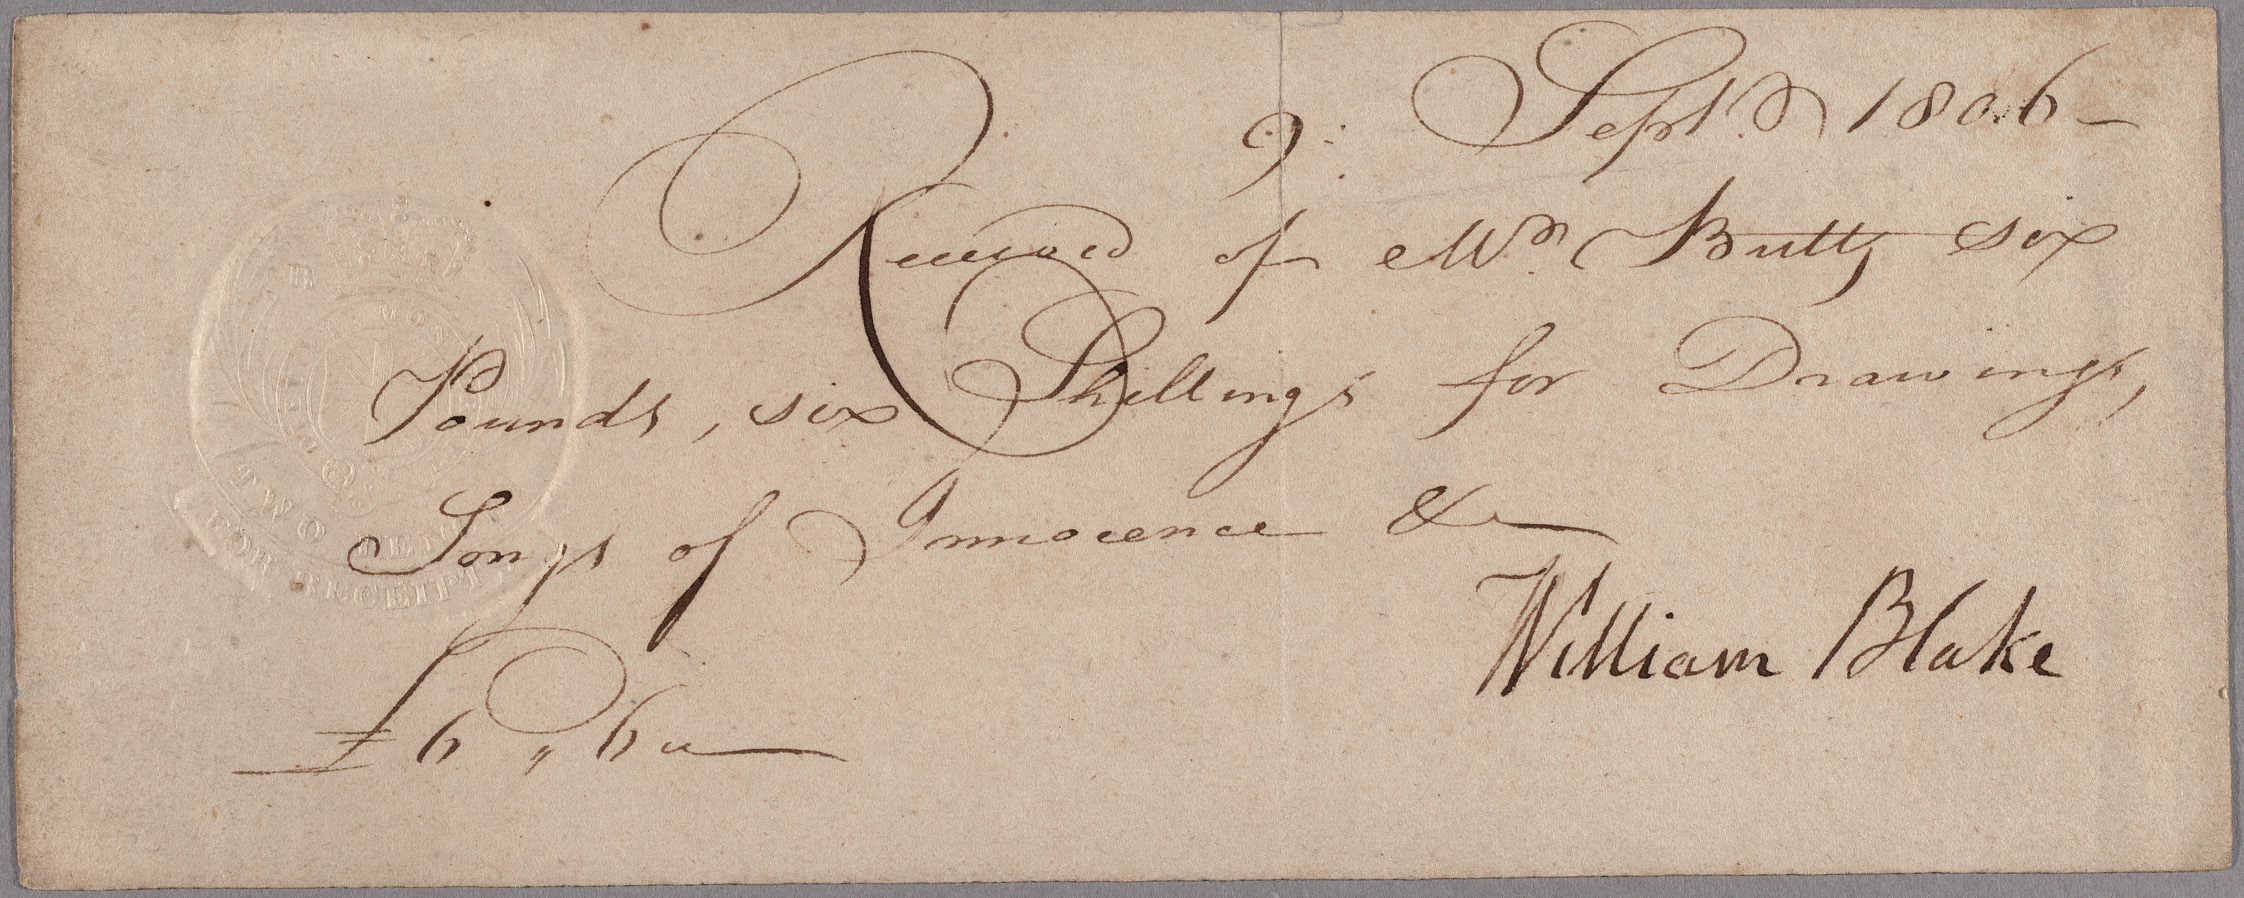 9 Sept. 1806 Received of W. Butts six Pounds, six Shillings for Drawings, Songs of Innocence
&c £6, 6 William Blake